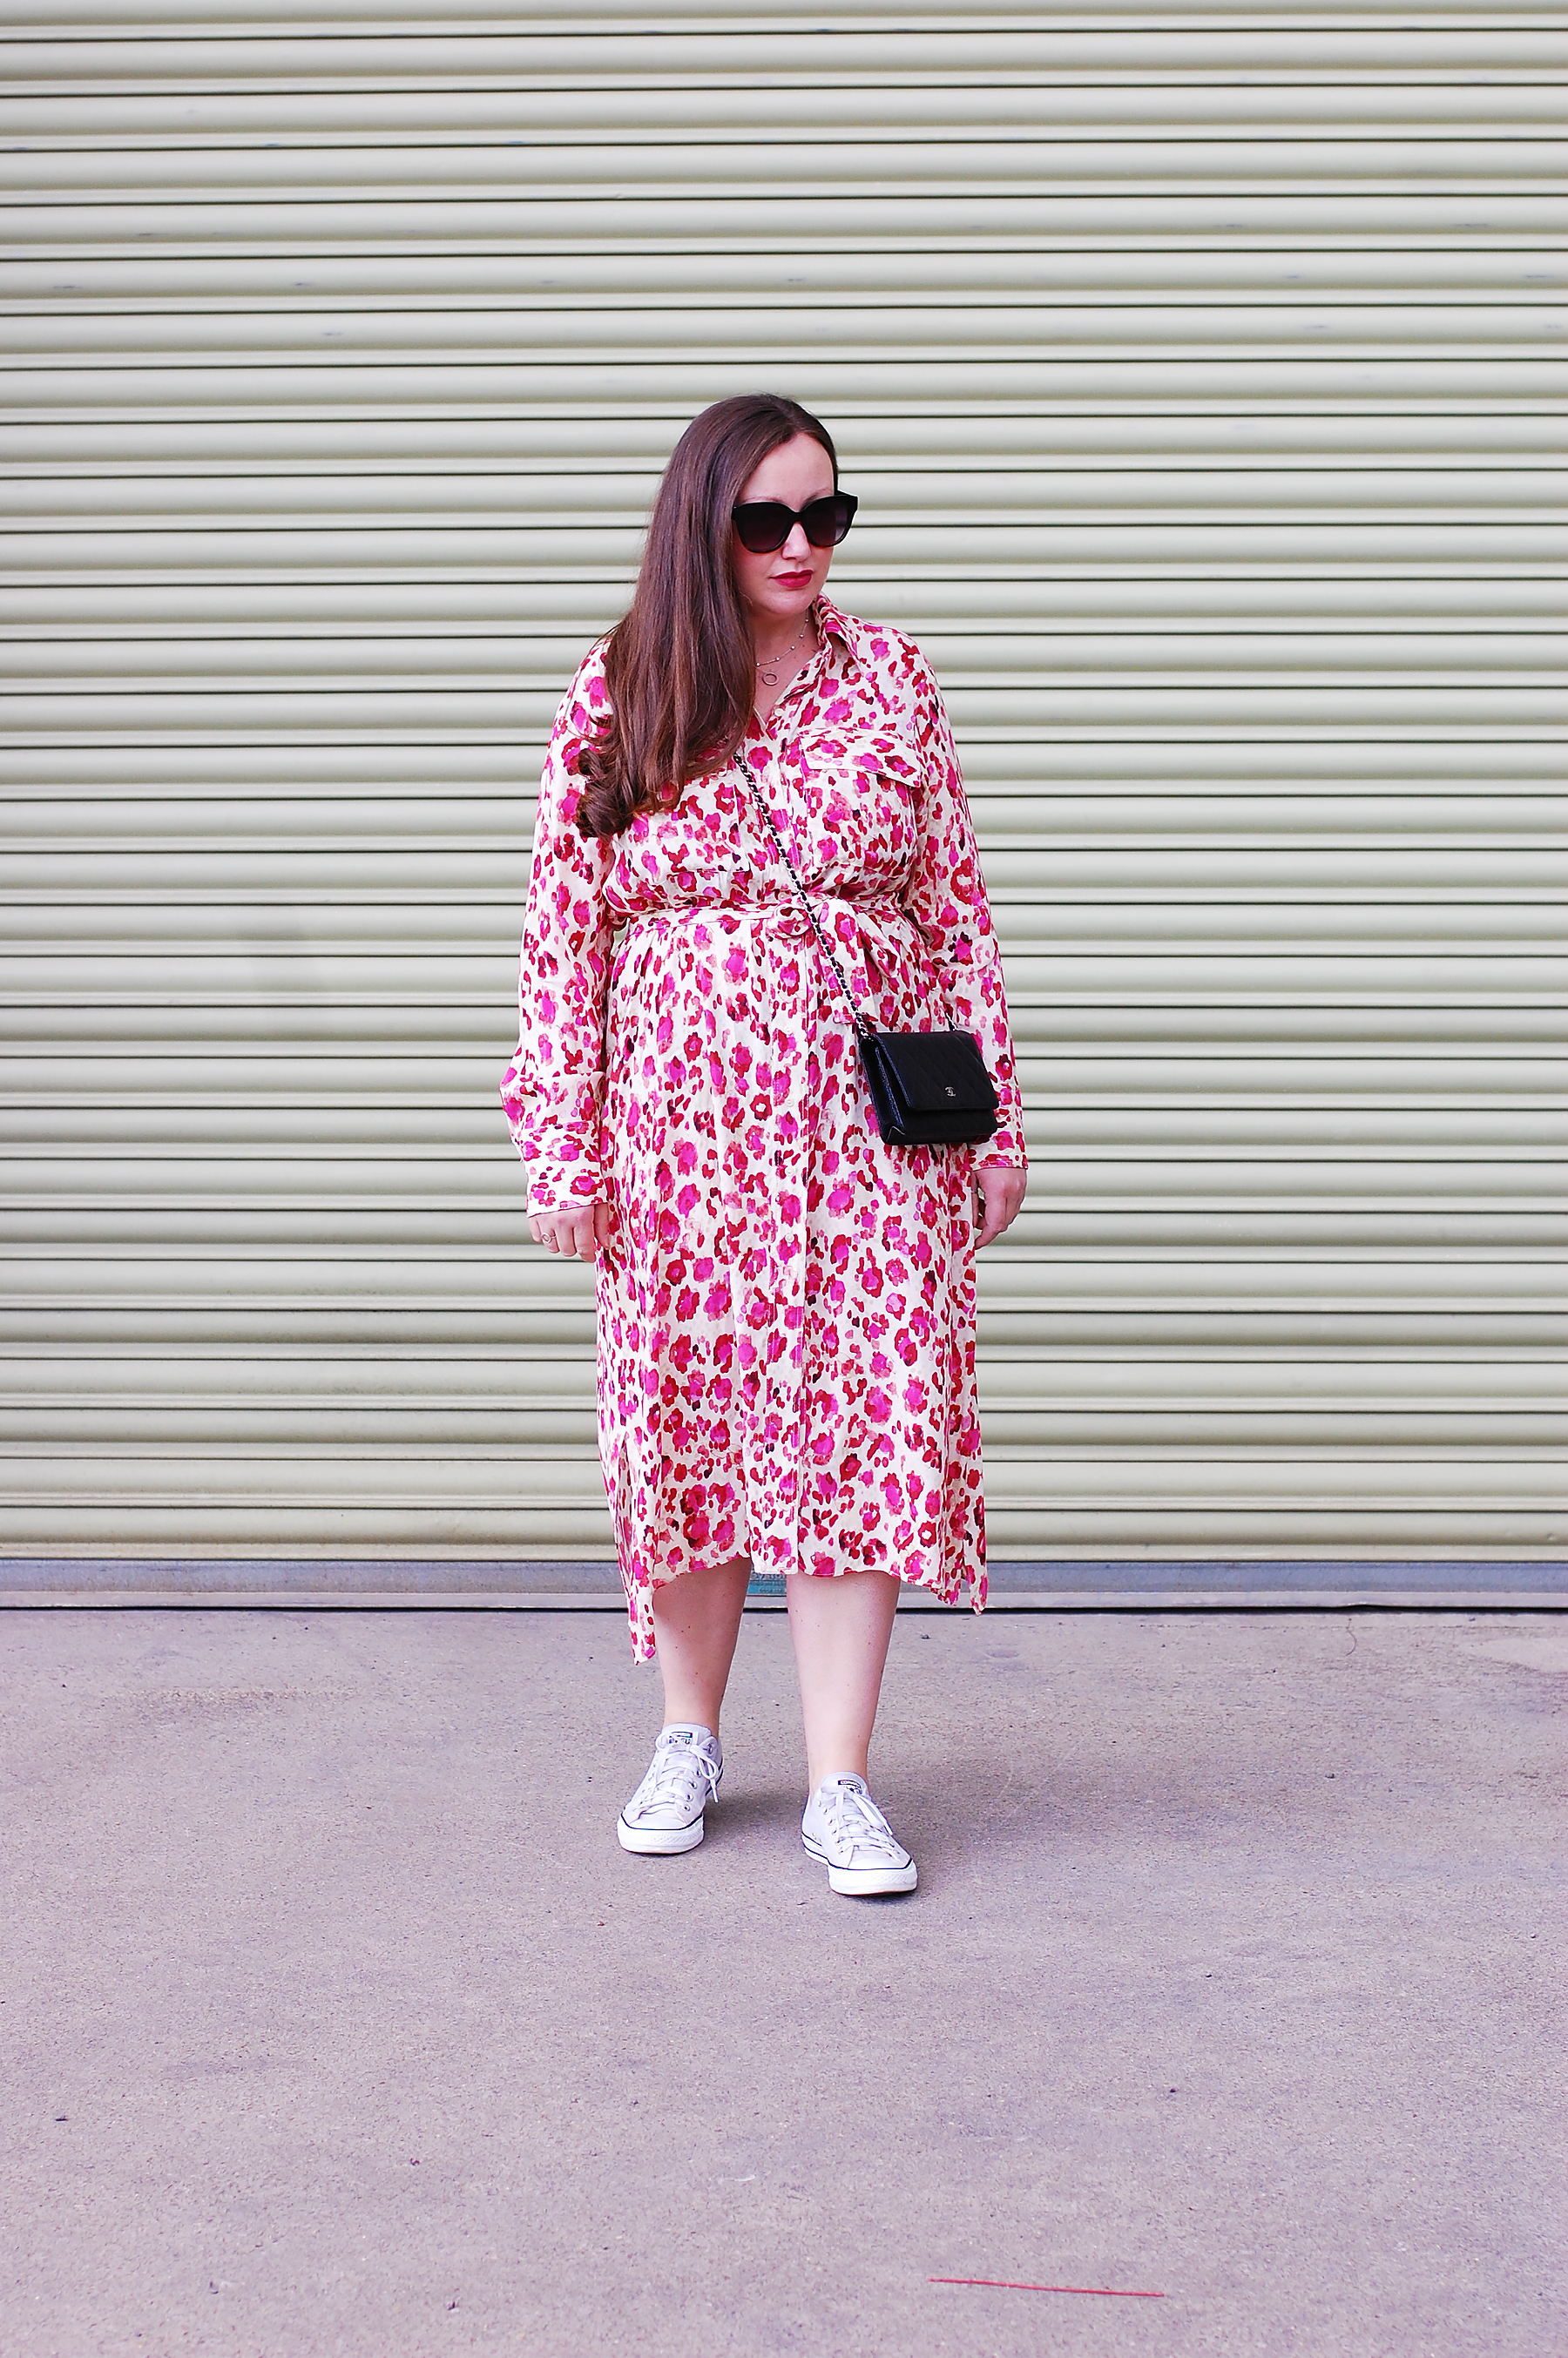 How to style a pink animal print dress